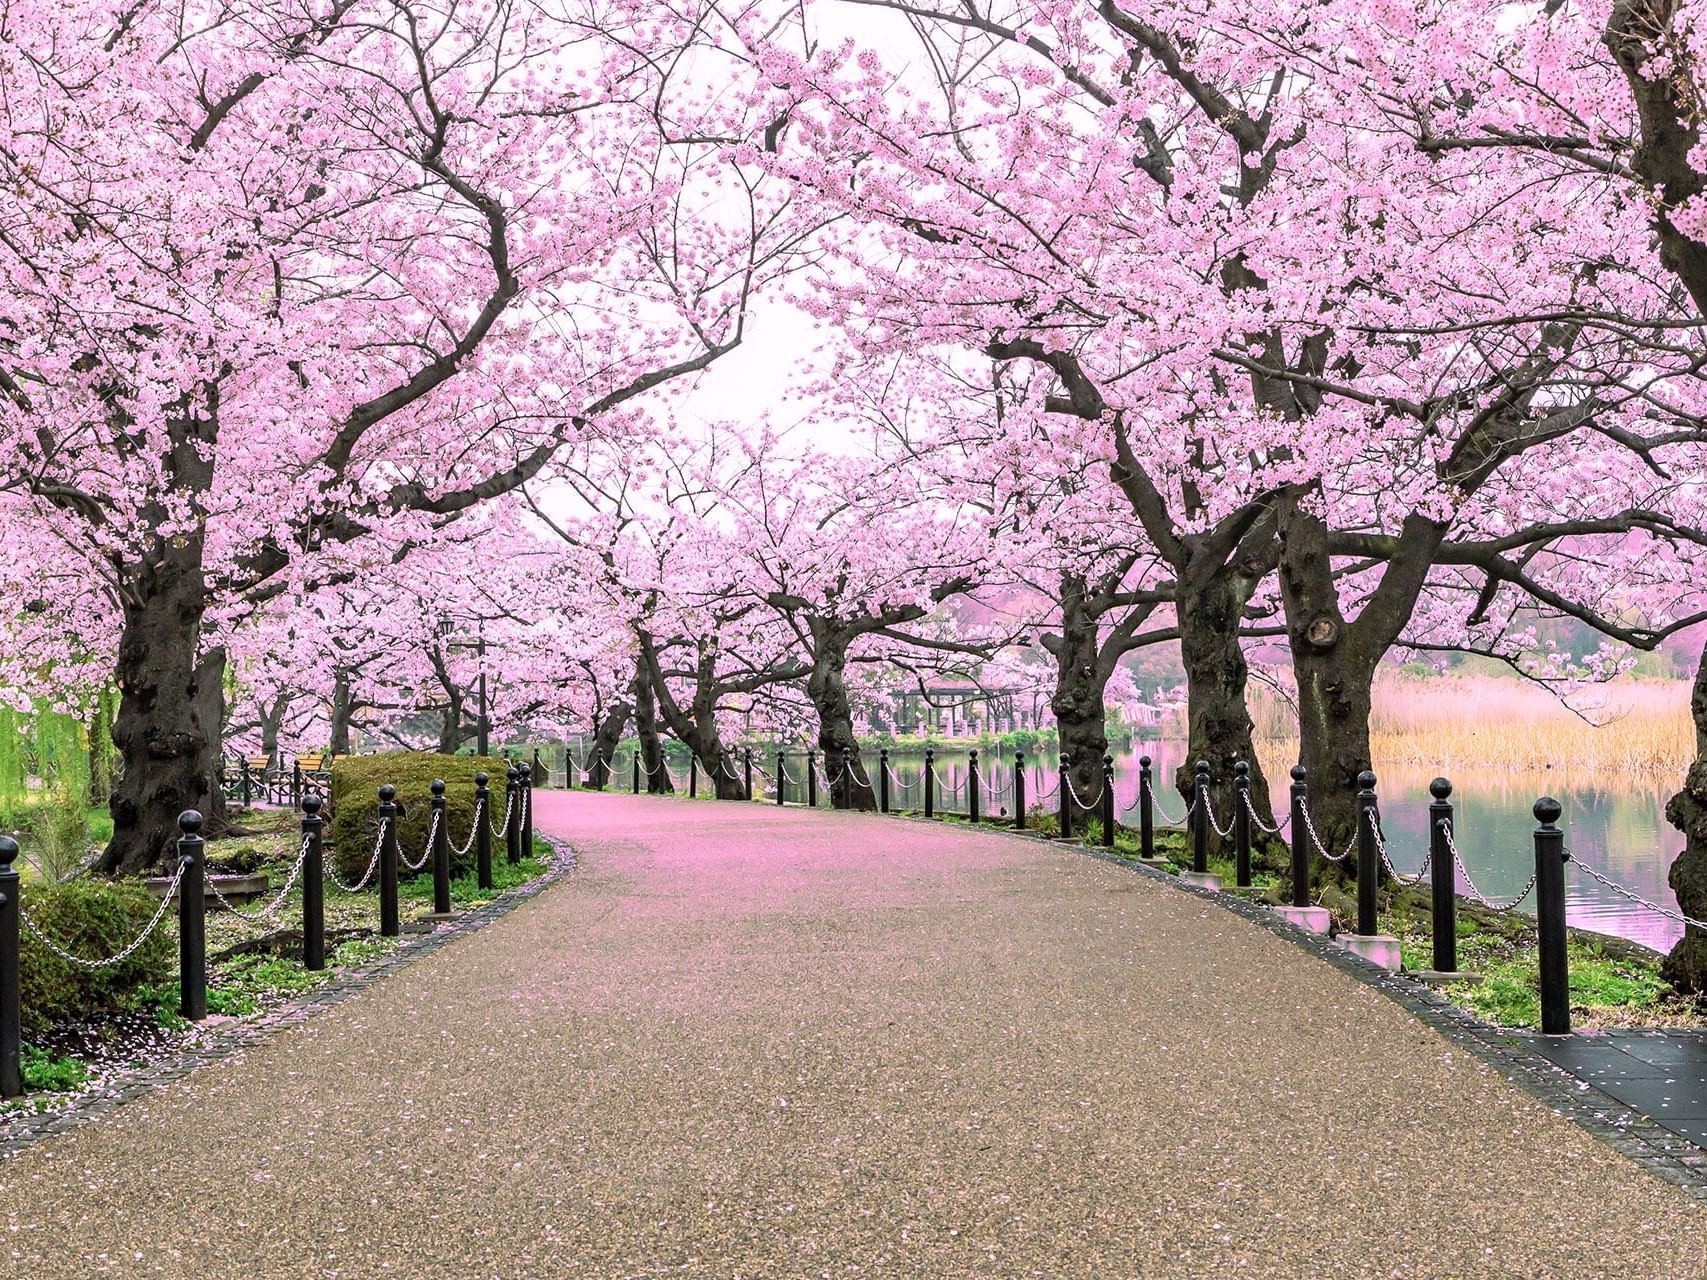 Picturesque path adorned with cherry blossom trees near Hop Inn Hotel